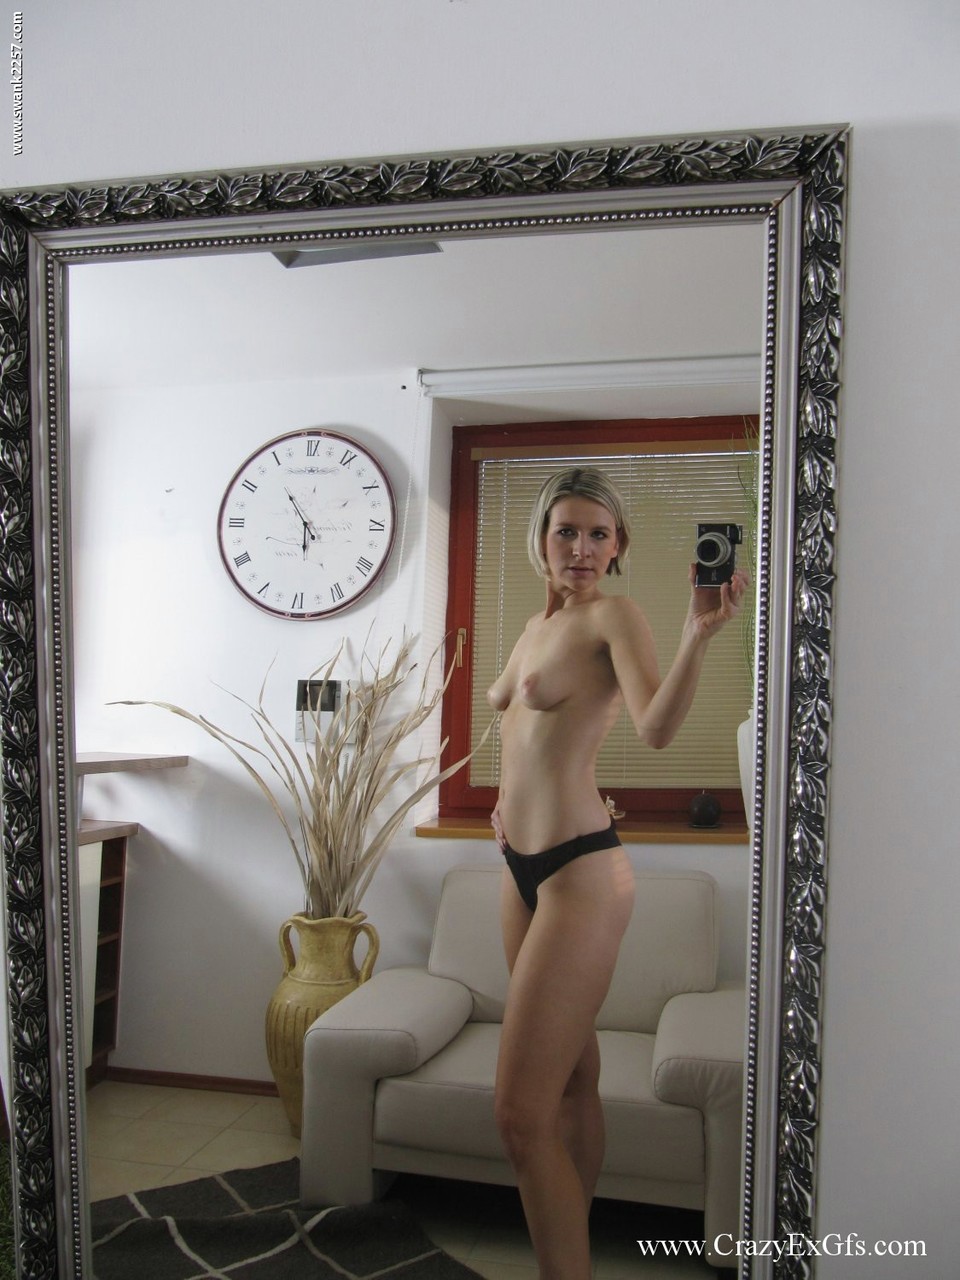 Blonde Amateur Takes Self Shots While Getting Totally Naked Afore A Mirror